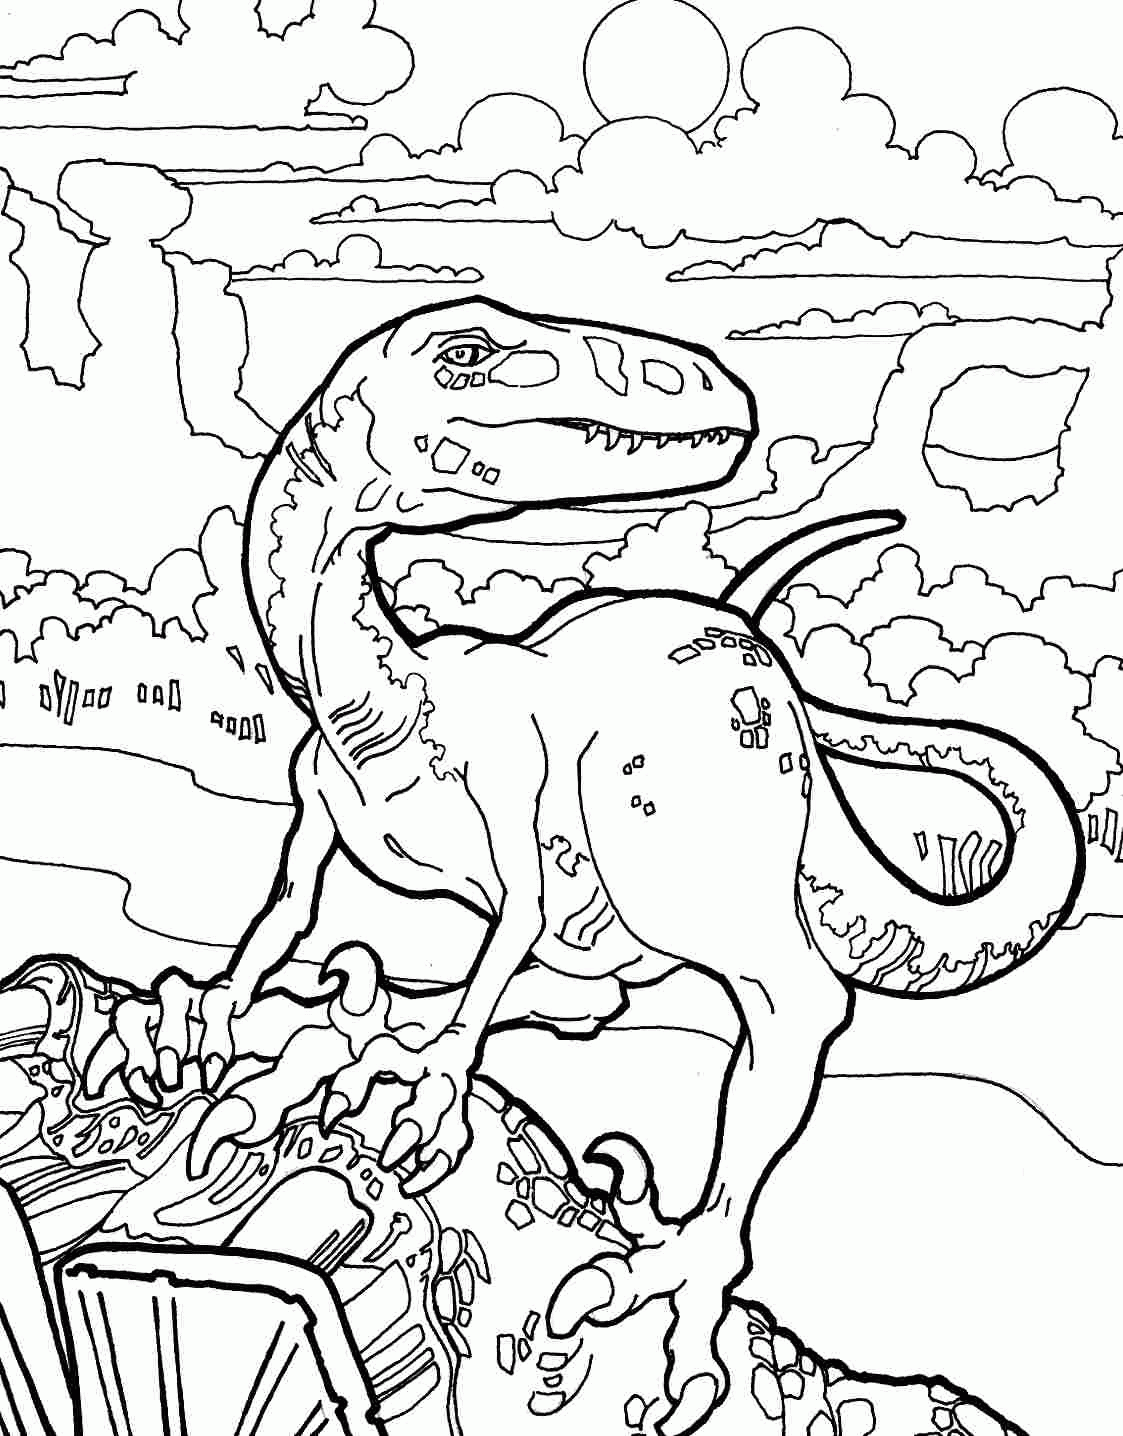 Dinosaurs Coloring Pages for boys Free Dinosaur Velociraptor Printable 2020 0307 Coloring4free